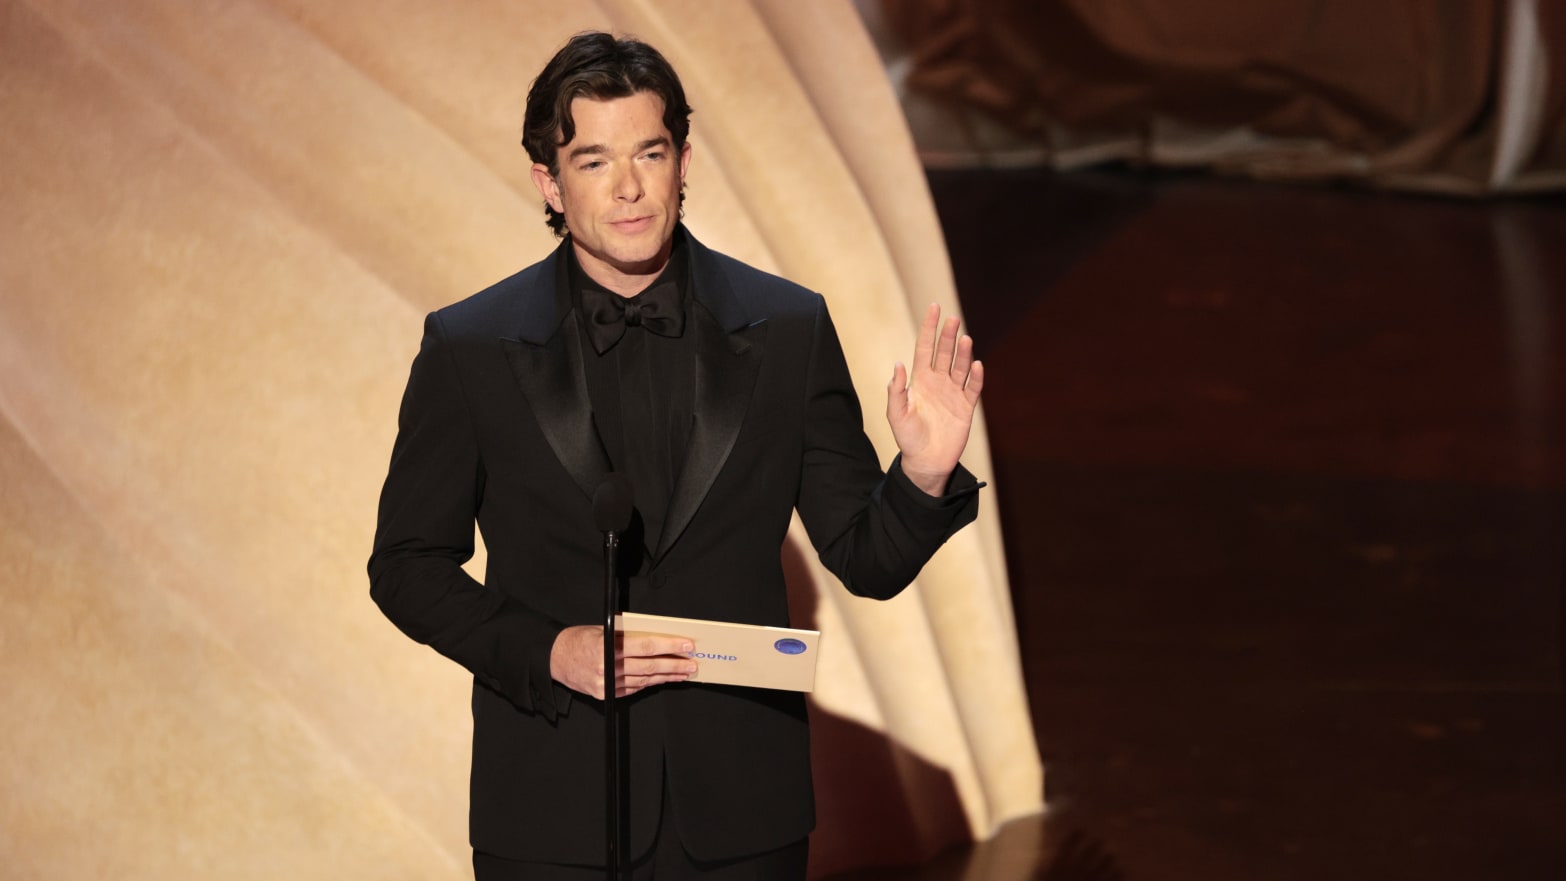 John Mulaney during the live telecast of the 96th Annual Academy Awards at the Dolby Theatre in Hollywood.